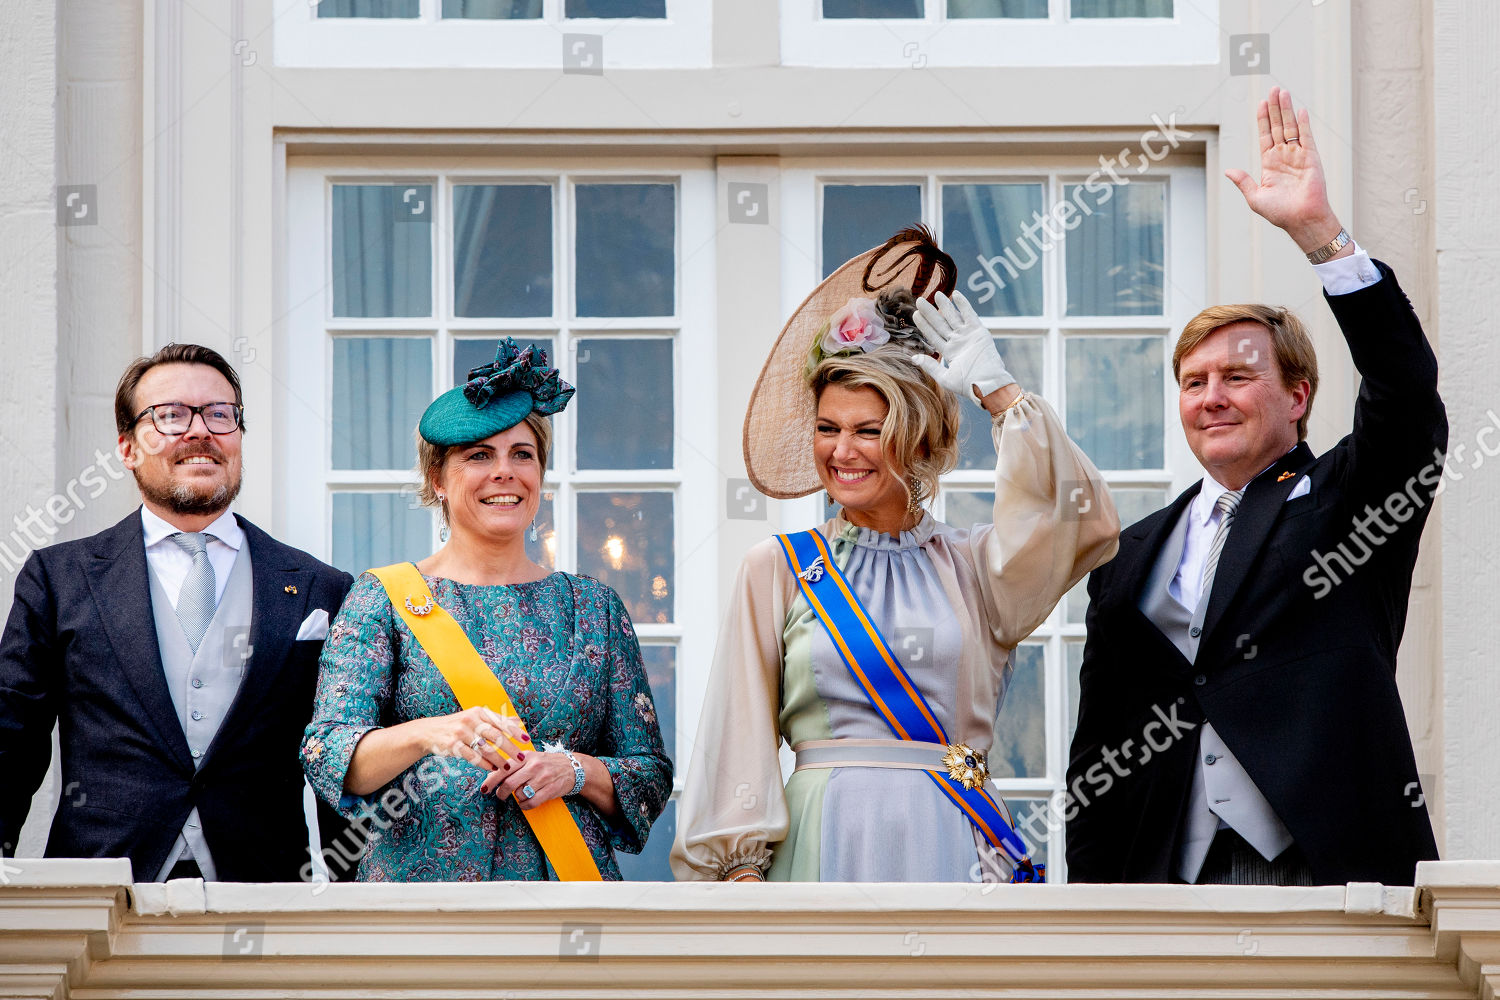 opening-of-the-parliamentary-season-the-hague-the-netherlands-shutterstock-editorial-9885898w.jpg